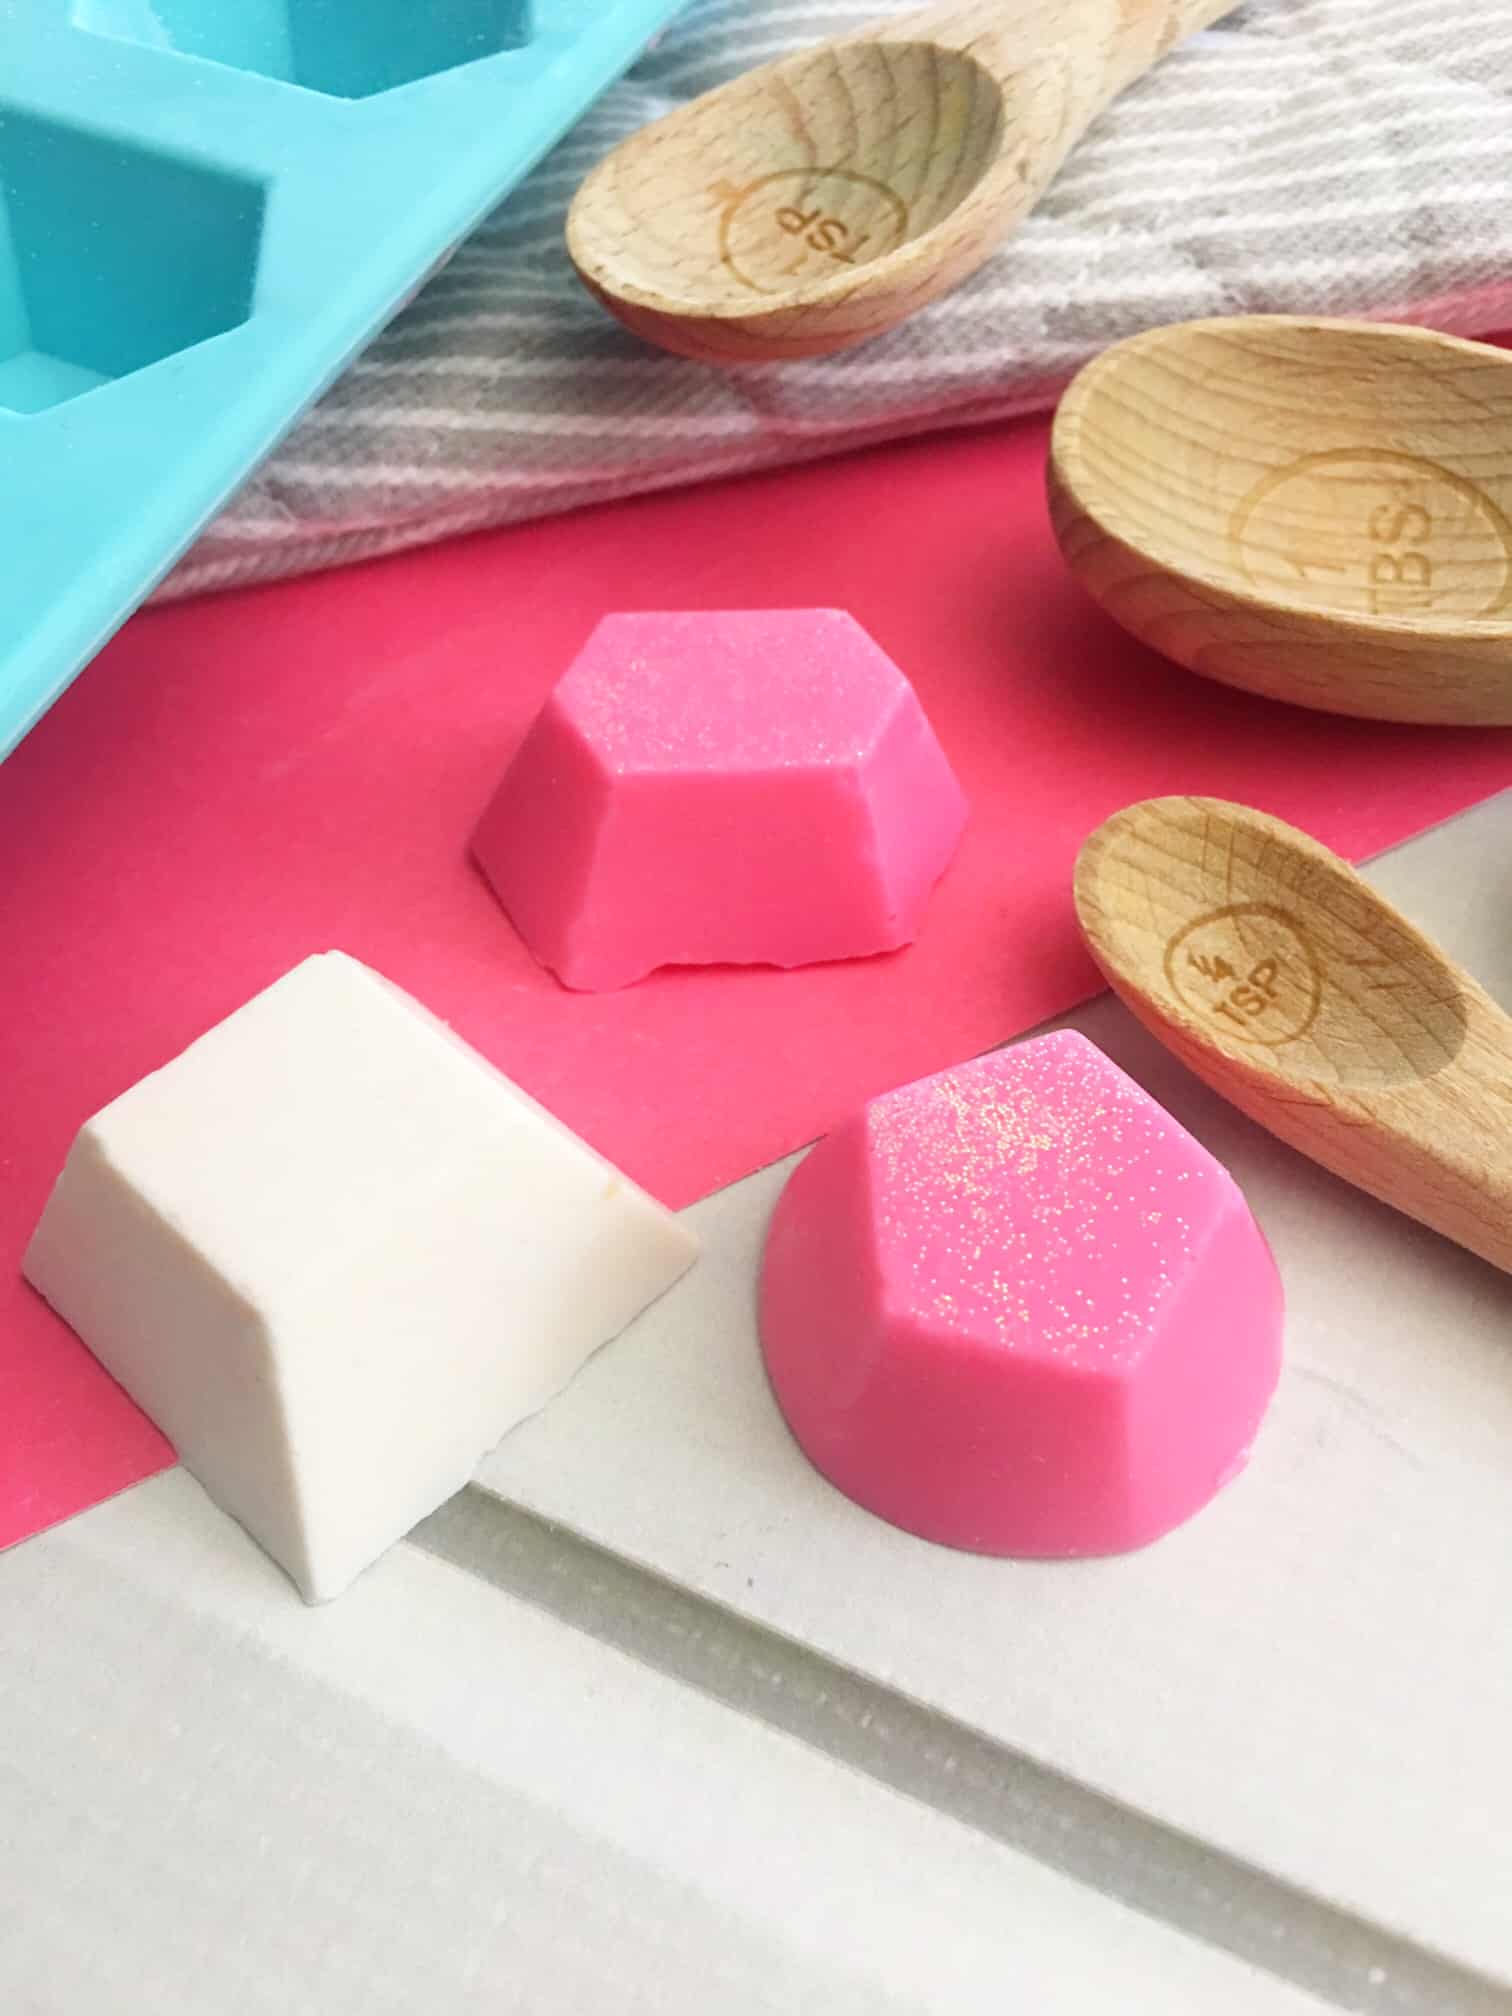 These chocolates are shaped like gems and sprinkle with glitter! Such a fun treat for a bridal or baby shower, or even a festive Christmas treat for guests.